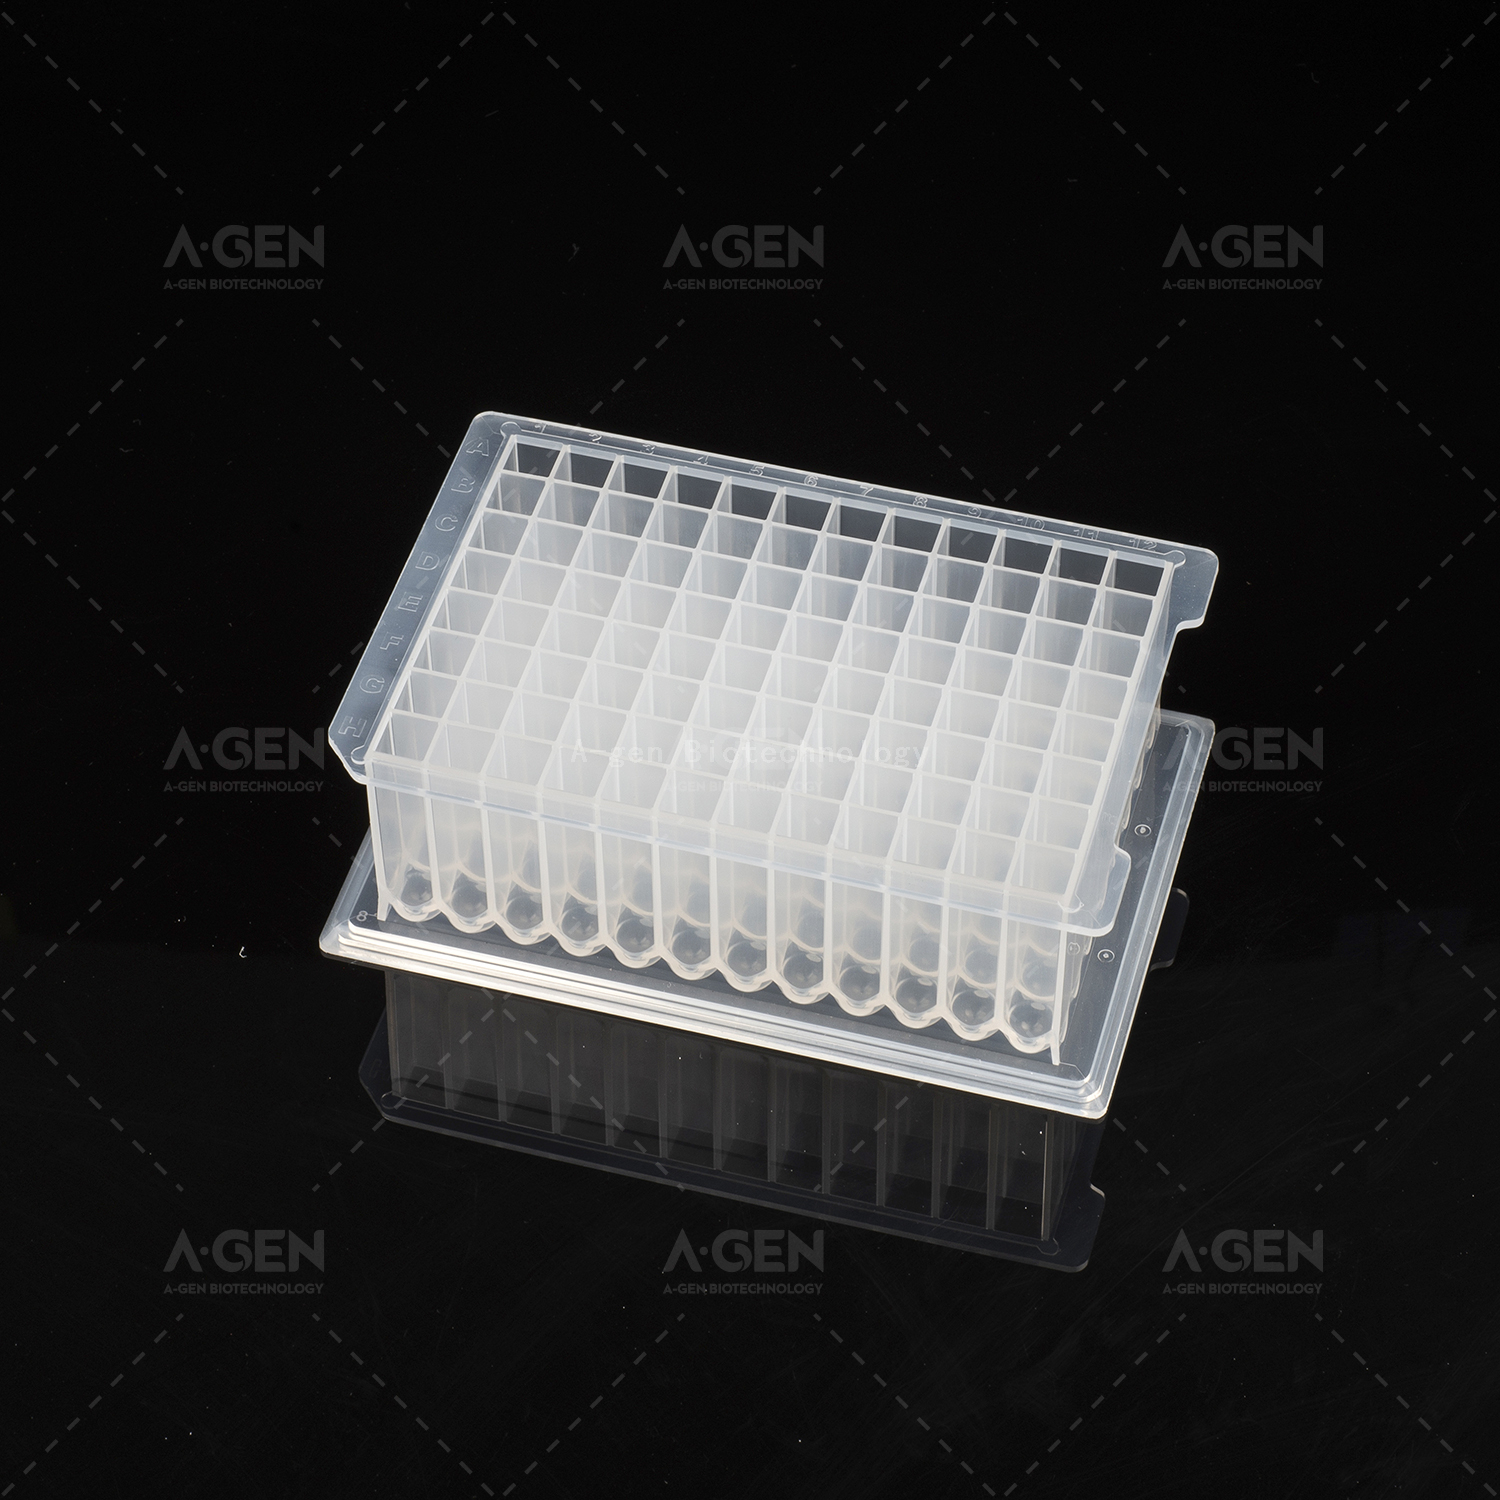 Lab Supplies 2.2ml 96 Square-Well Deep Well Plate